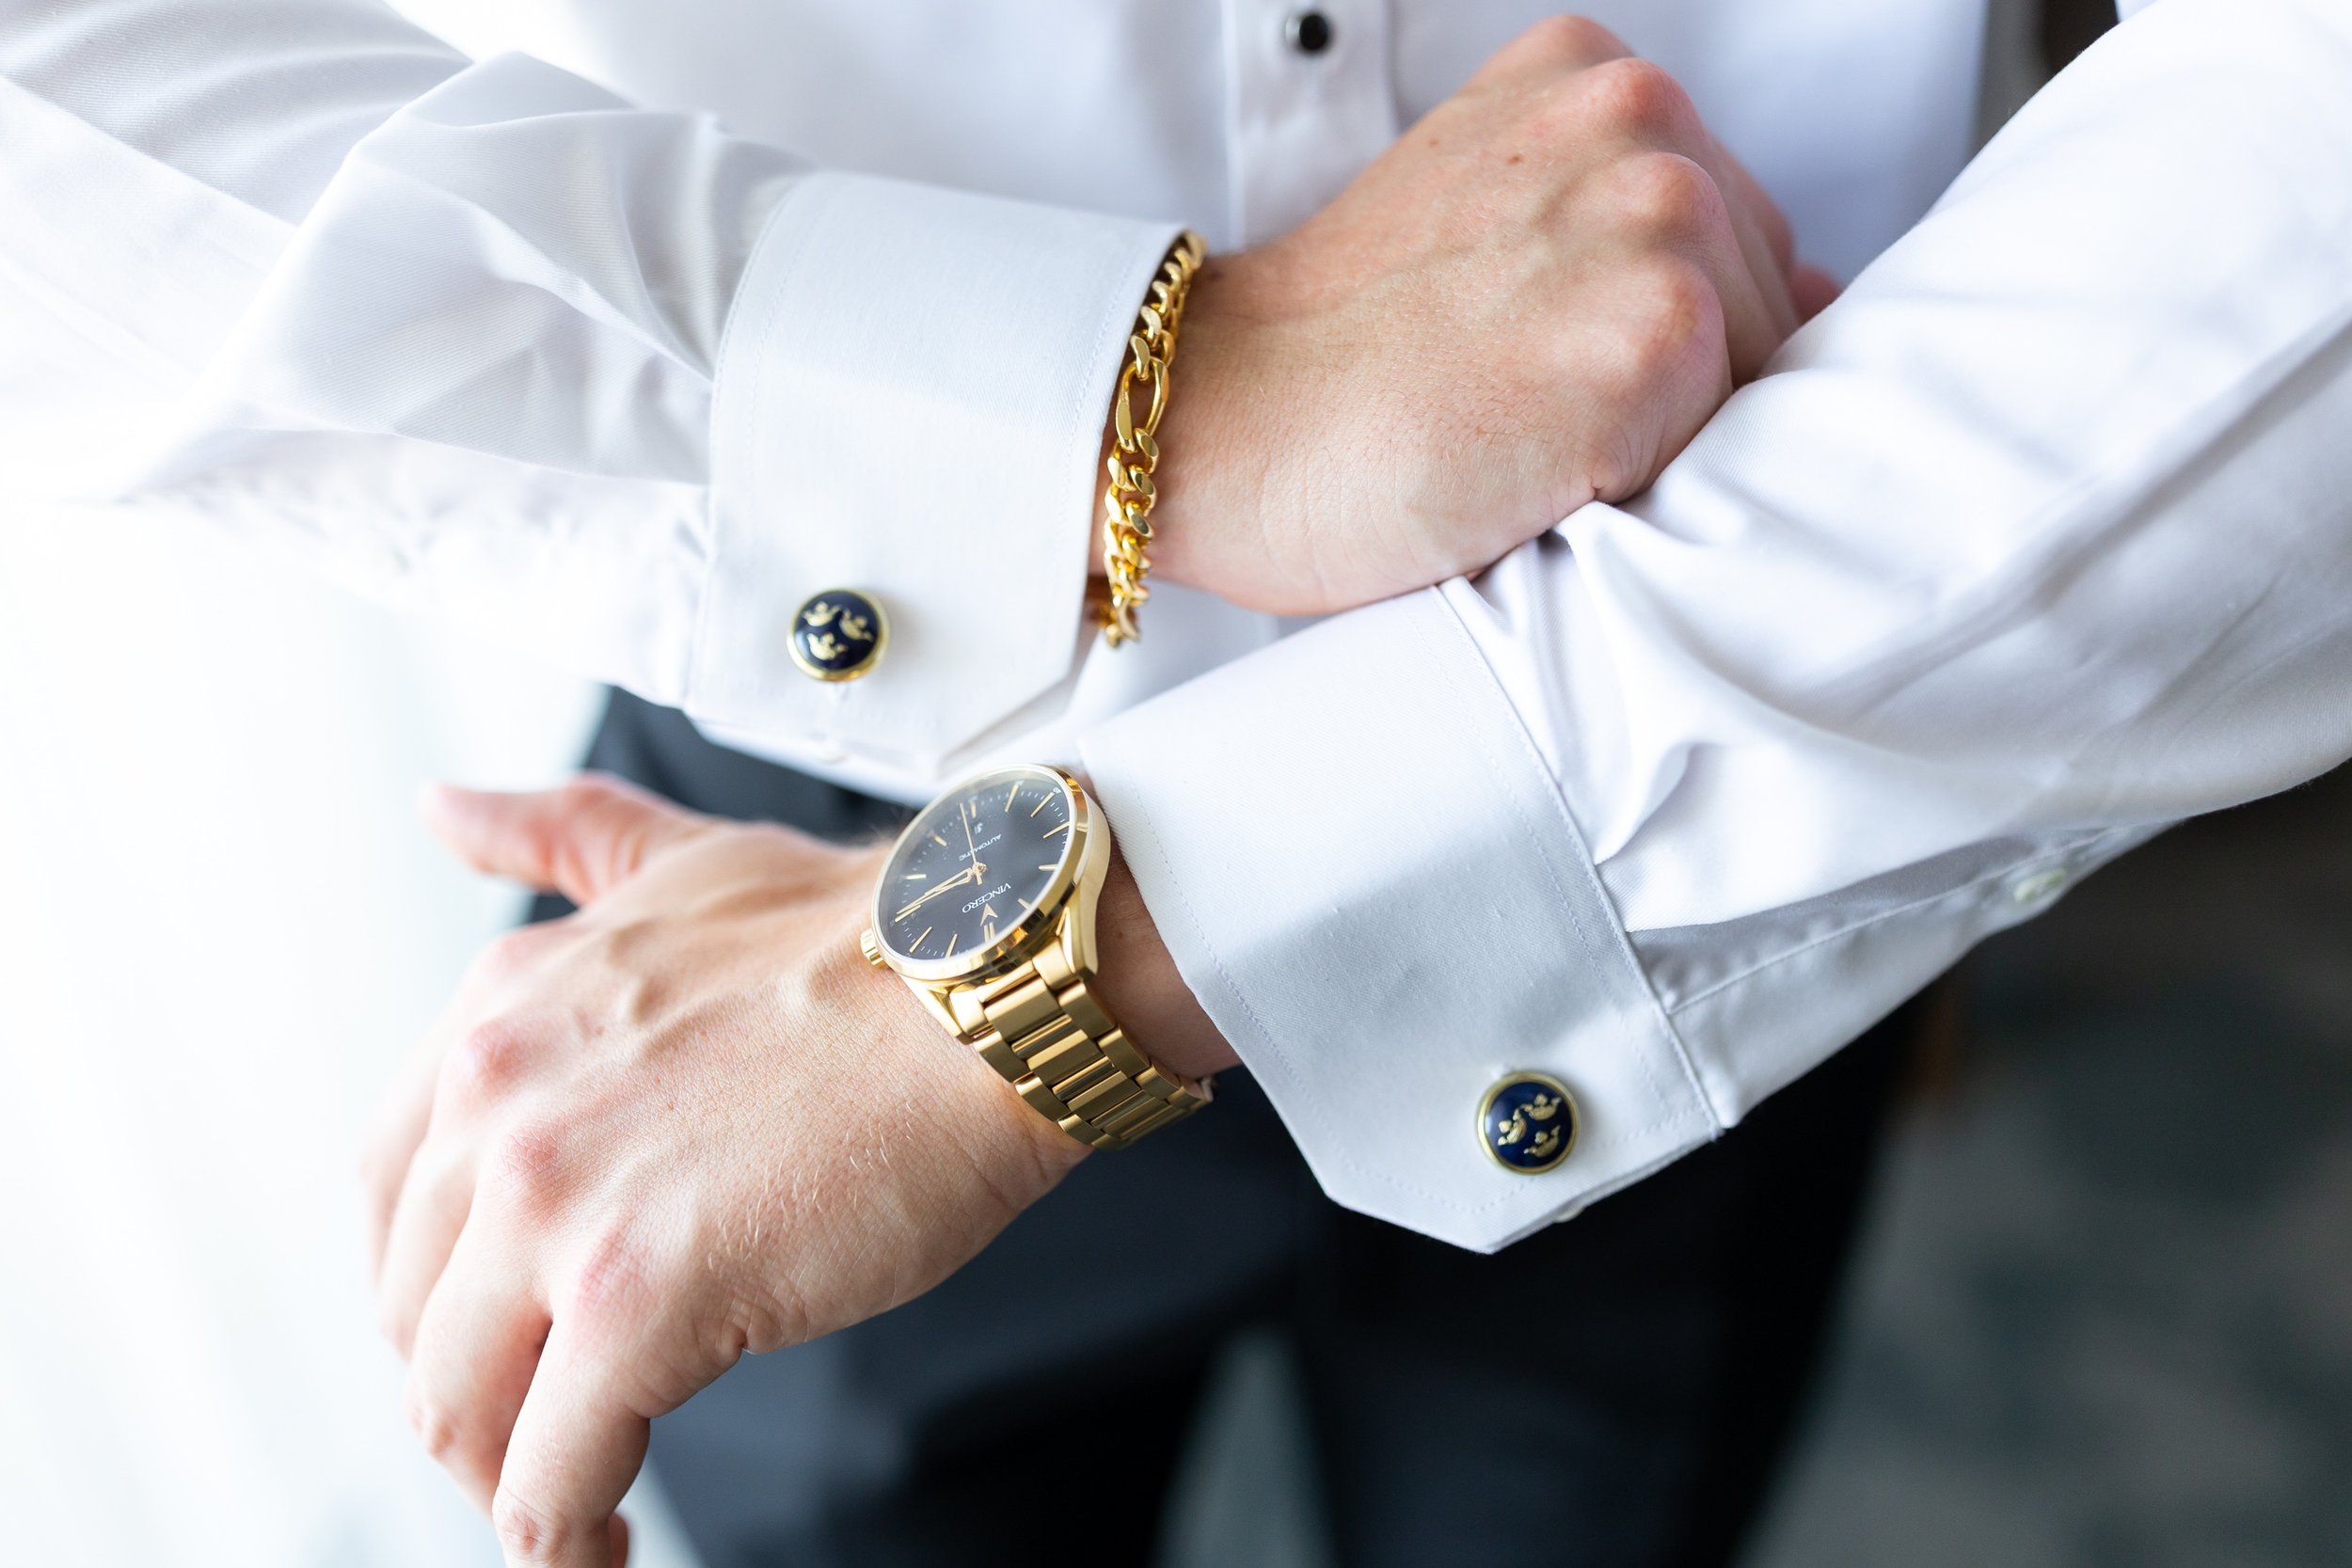 Groom's cufflinks and watch during getting ready photos 